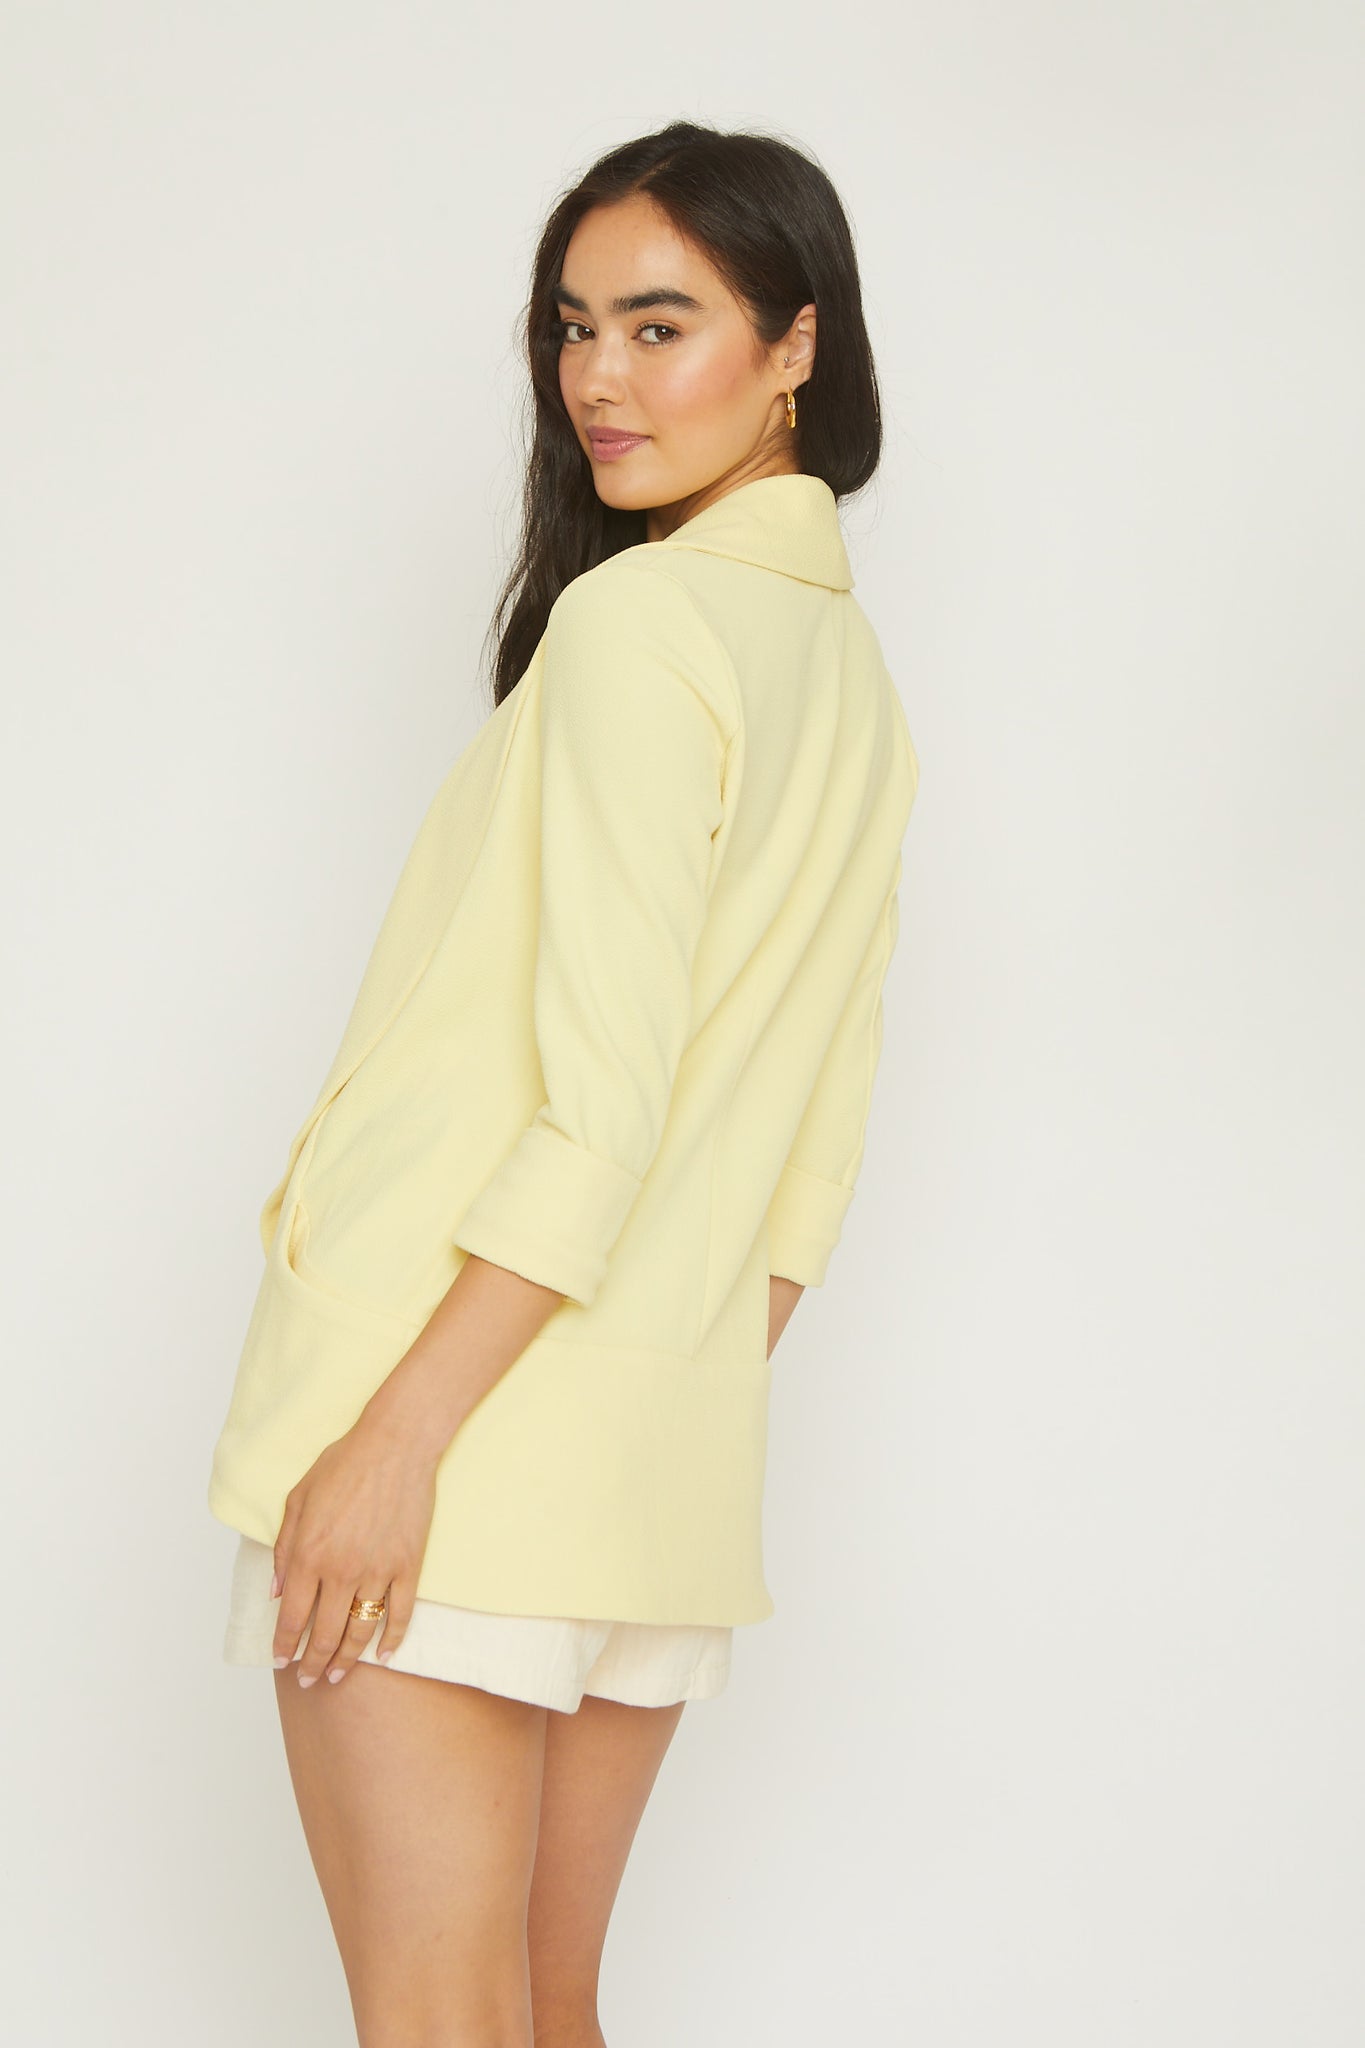 Melanie shawl knit jacket, crepe knit fabric, 3/4 sleeve length, shawl collar, open front, front pockets, stretch fabric, textured knit, lemon color